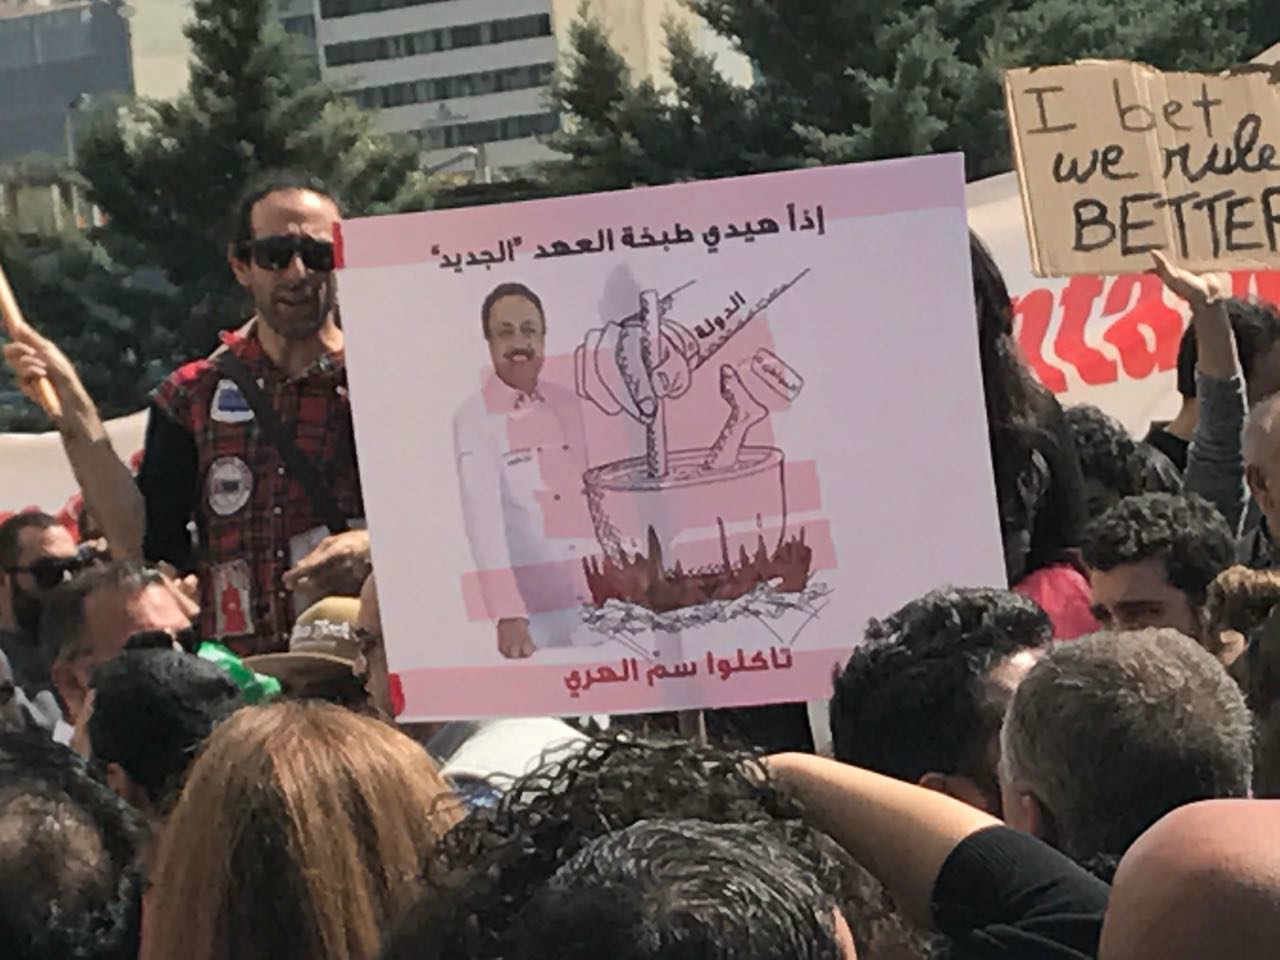 Funny Signs from Today's Protest